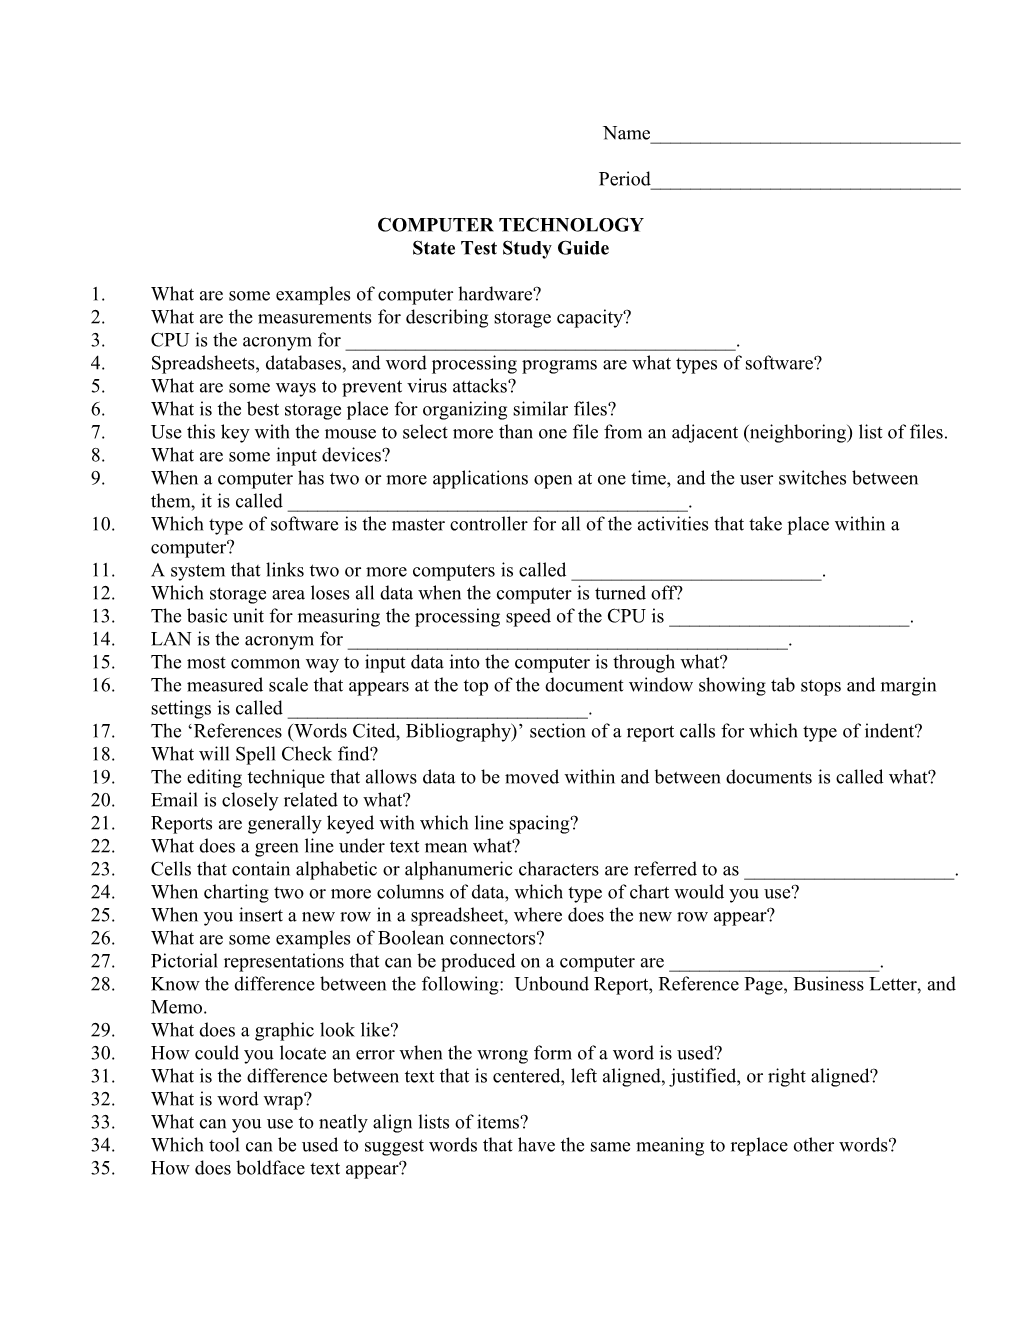 State Test Study Guide